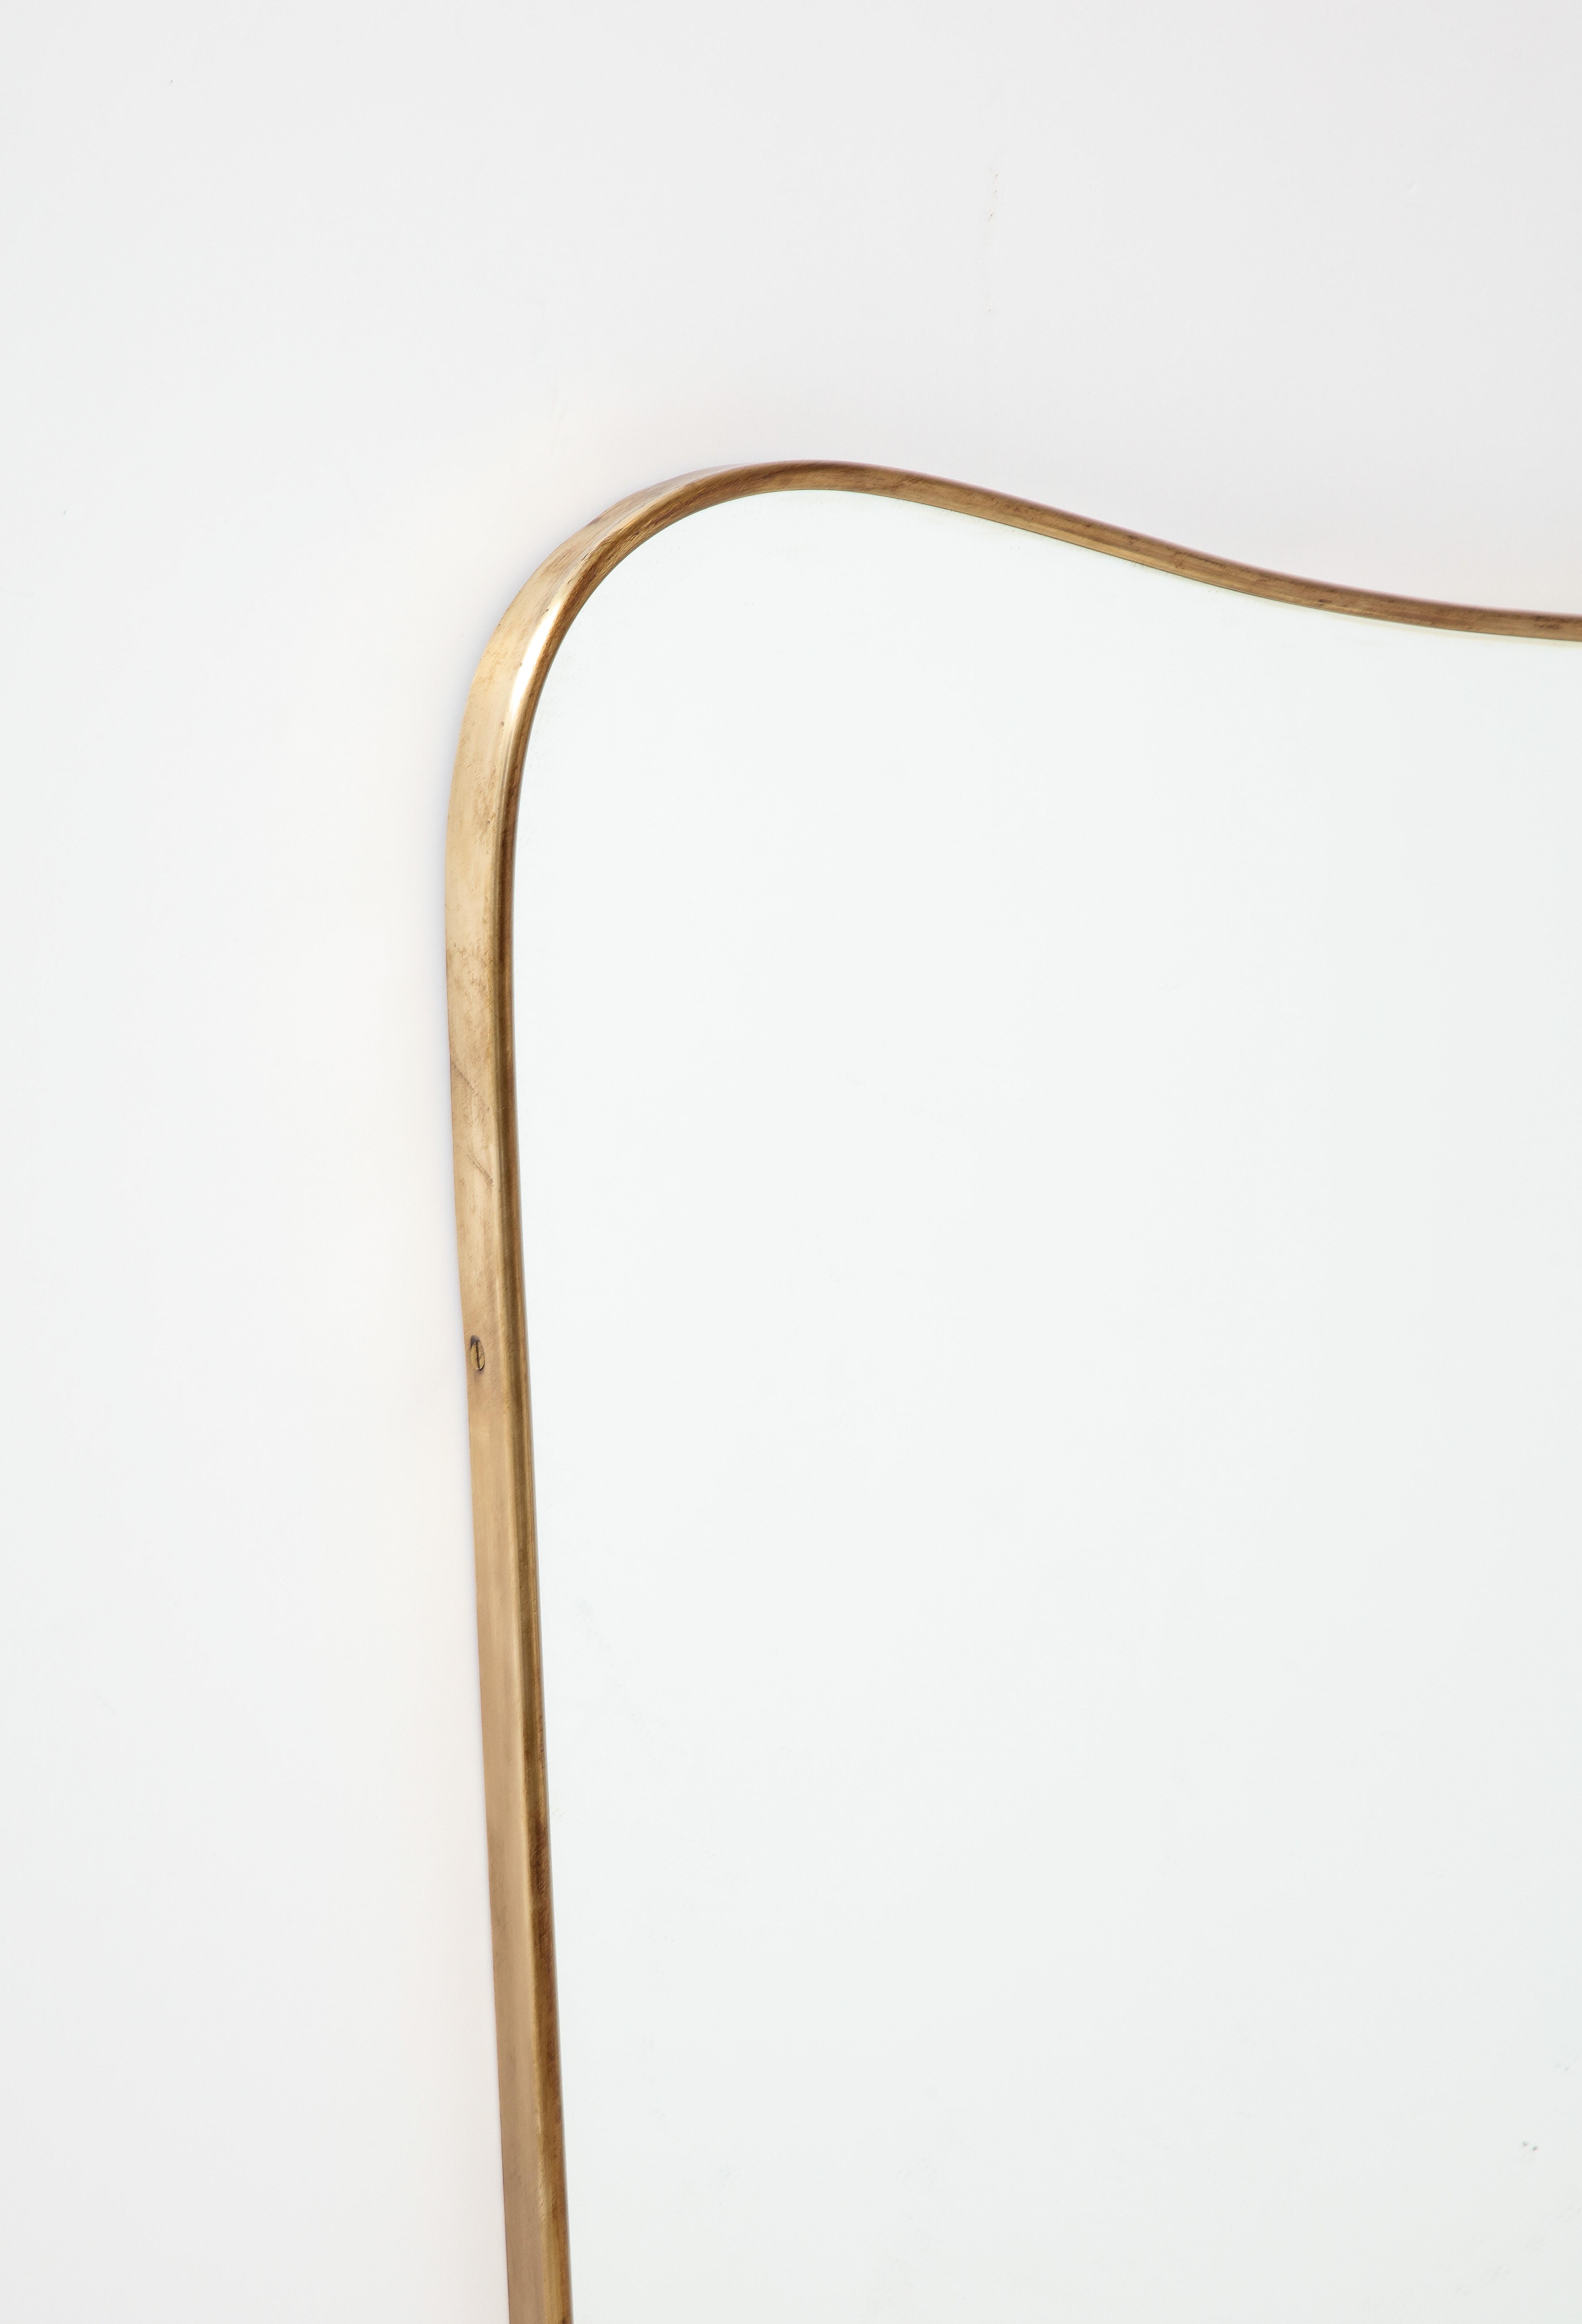 Mid-20th Century 1950s Italian Modernist Grand Scale Shaped Brass Mirror For Sale